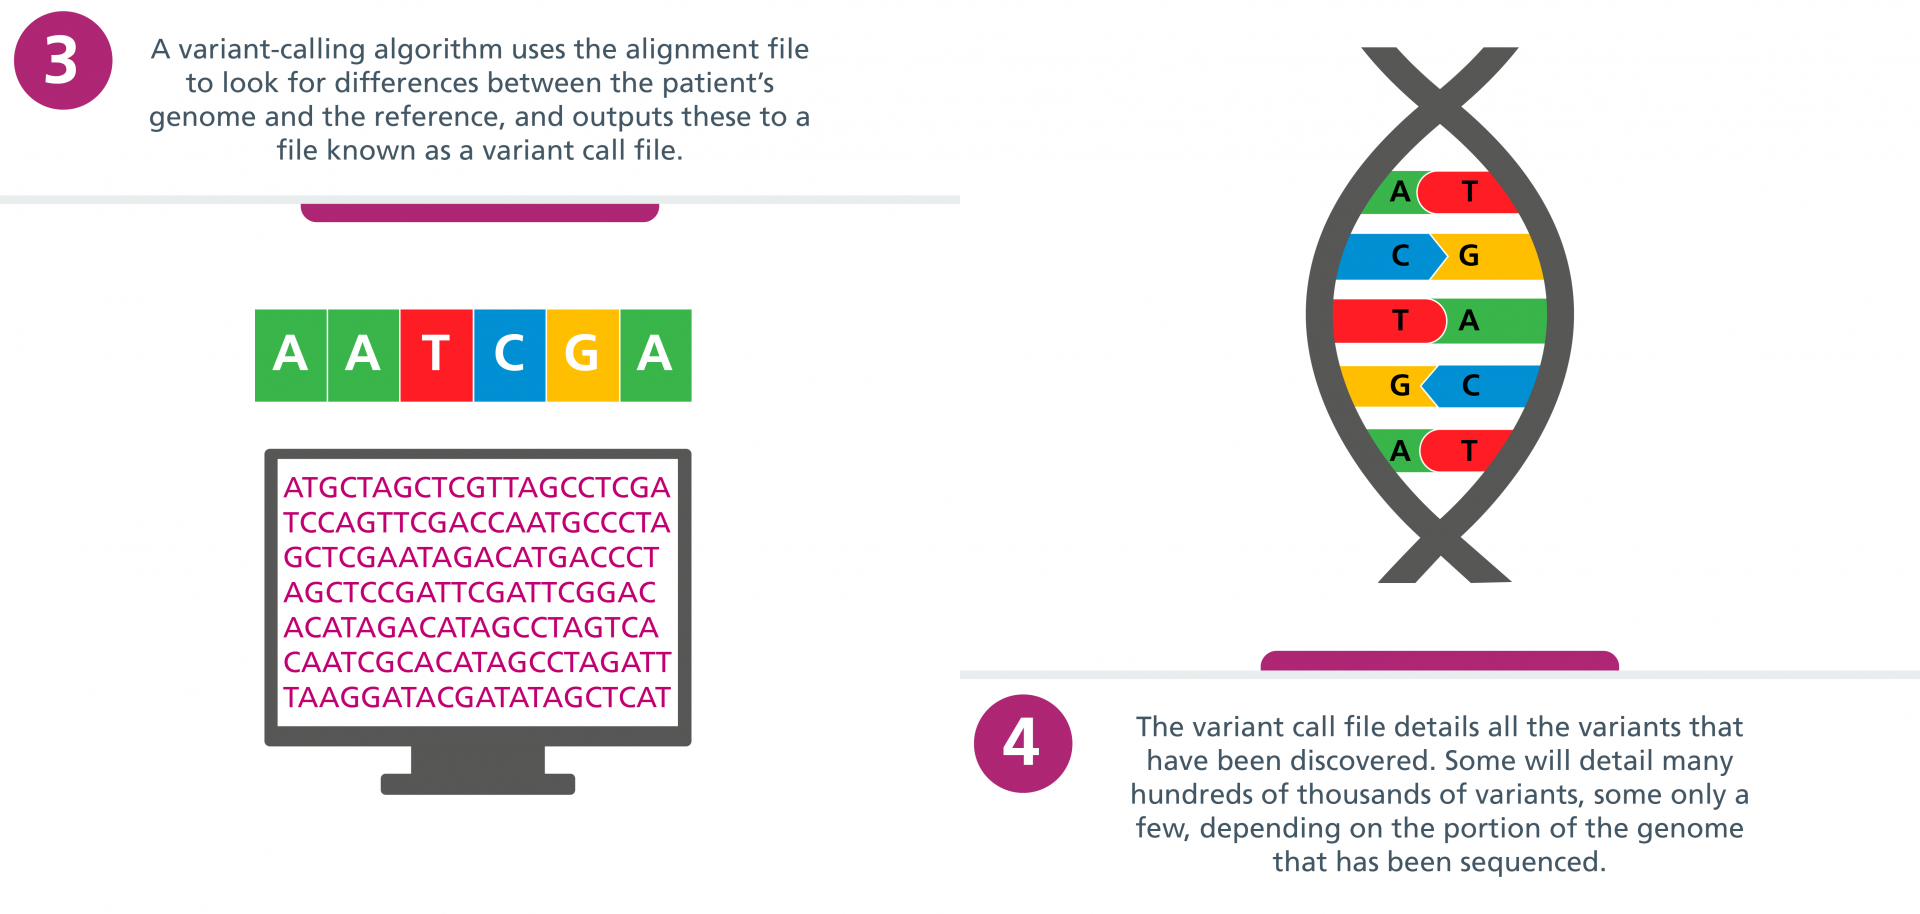 Step 3: A variant-calling algorithm uses the alignment file to look for differences between the patient's genome and the reference, and outputs these to a file known as a variant call file. Step 4: The variant call file details all the variants that have been discovered. Some will detail many hundreds of thousands, some only a few, depending on the portion of the genome that has been sequenced.